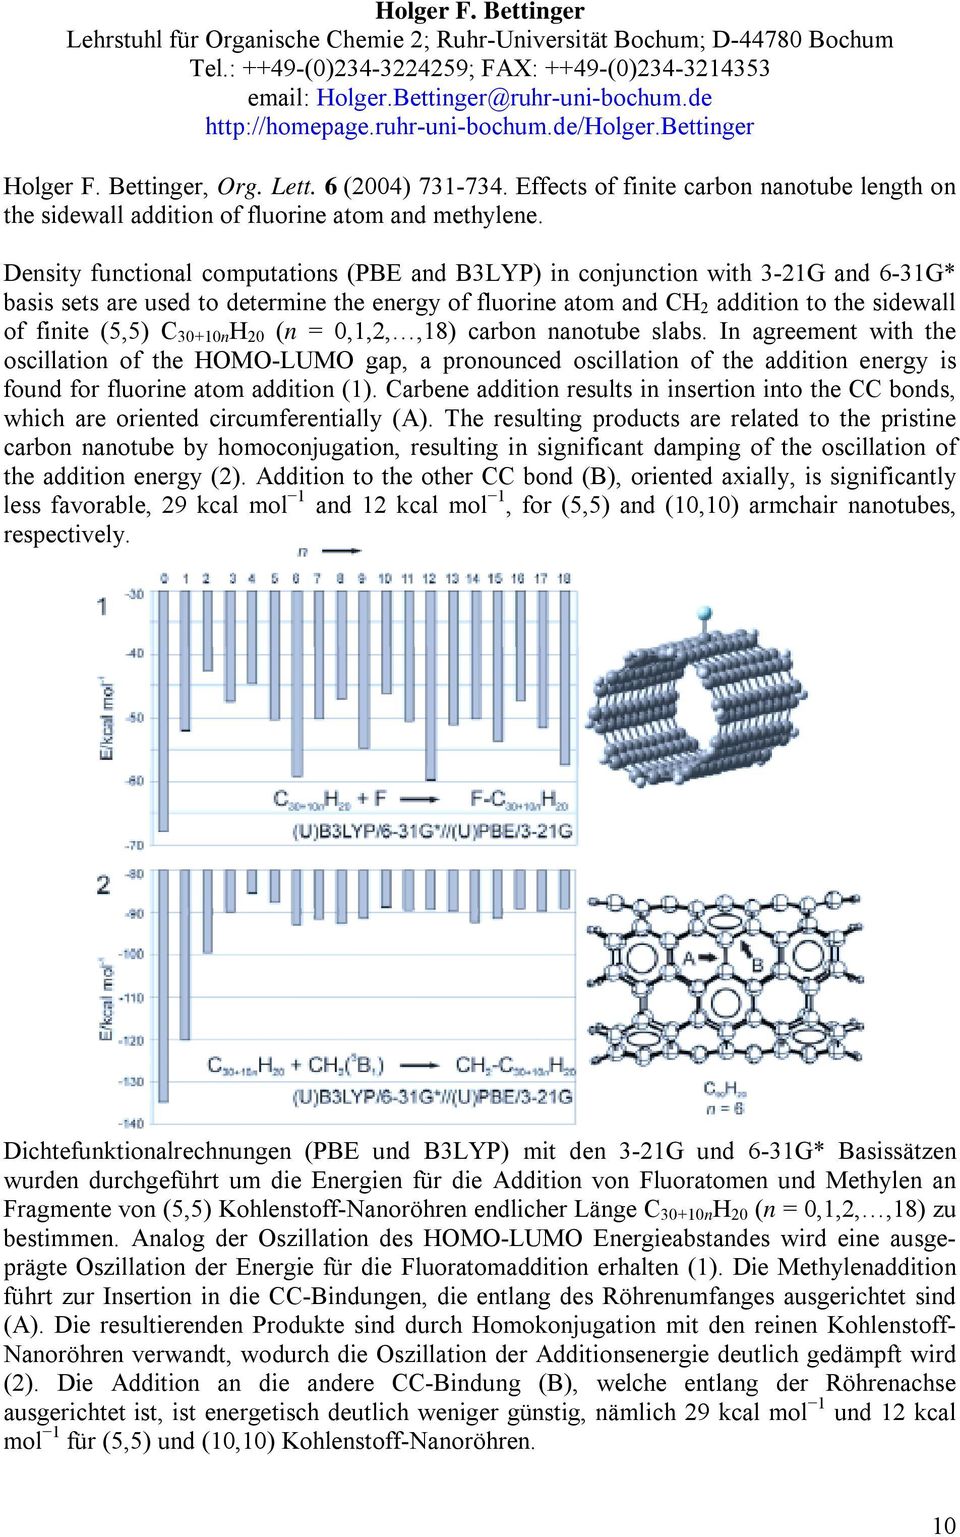 Effects of finite carbon nanotube length on the sidewall addition of fluorine atom and methylene.